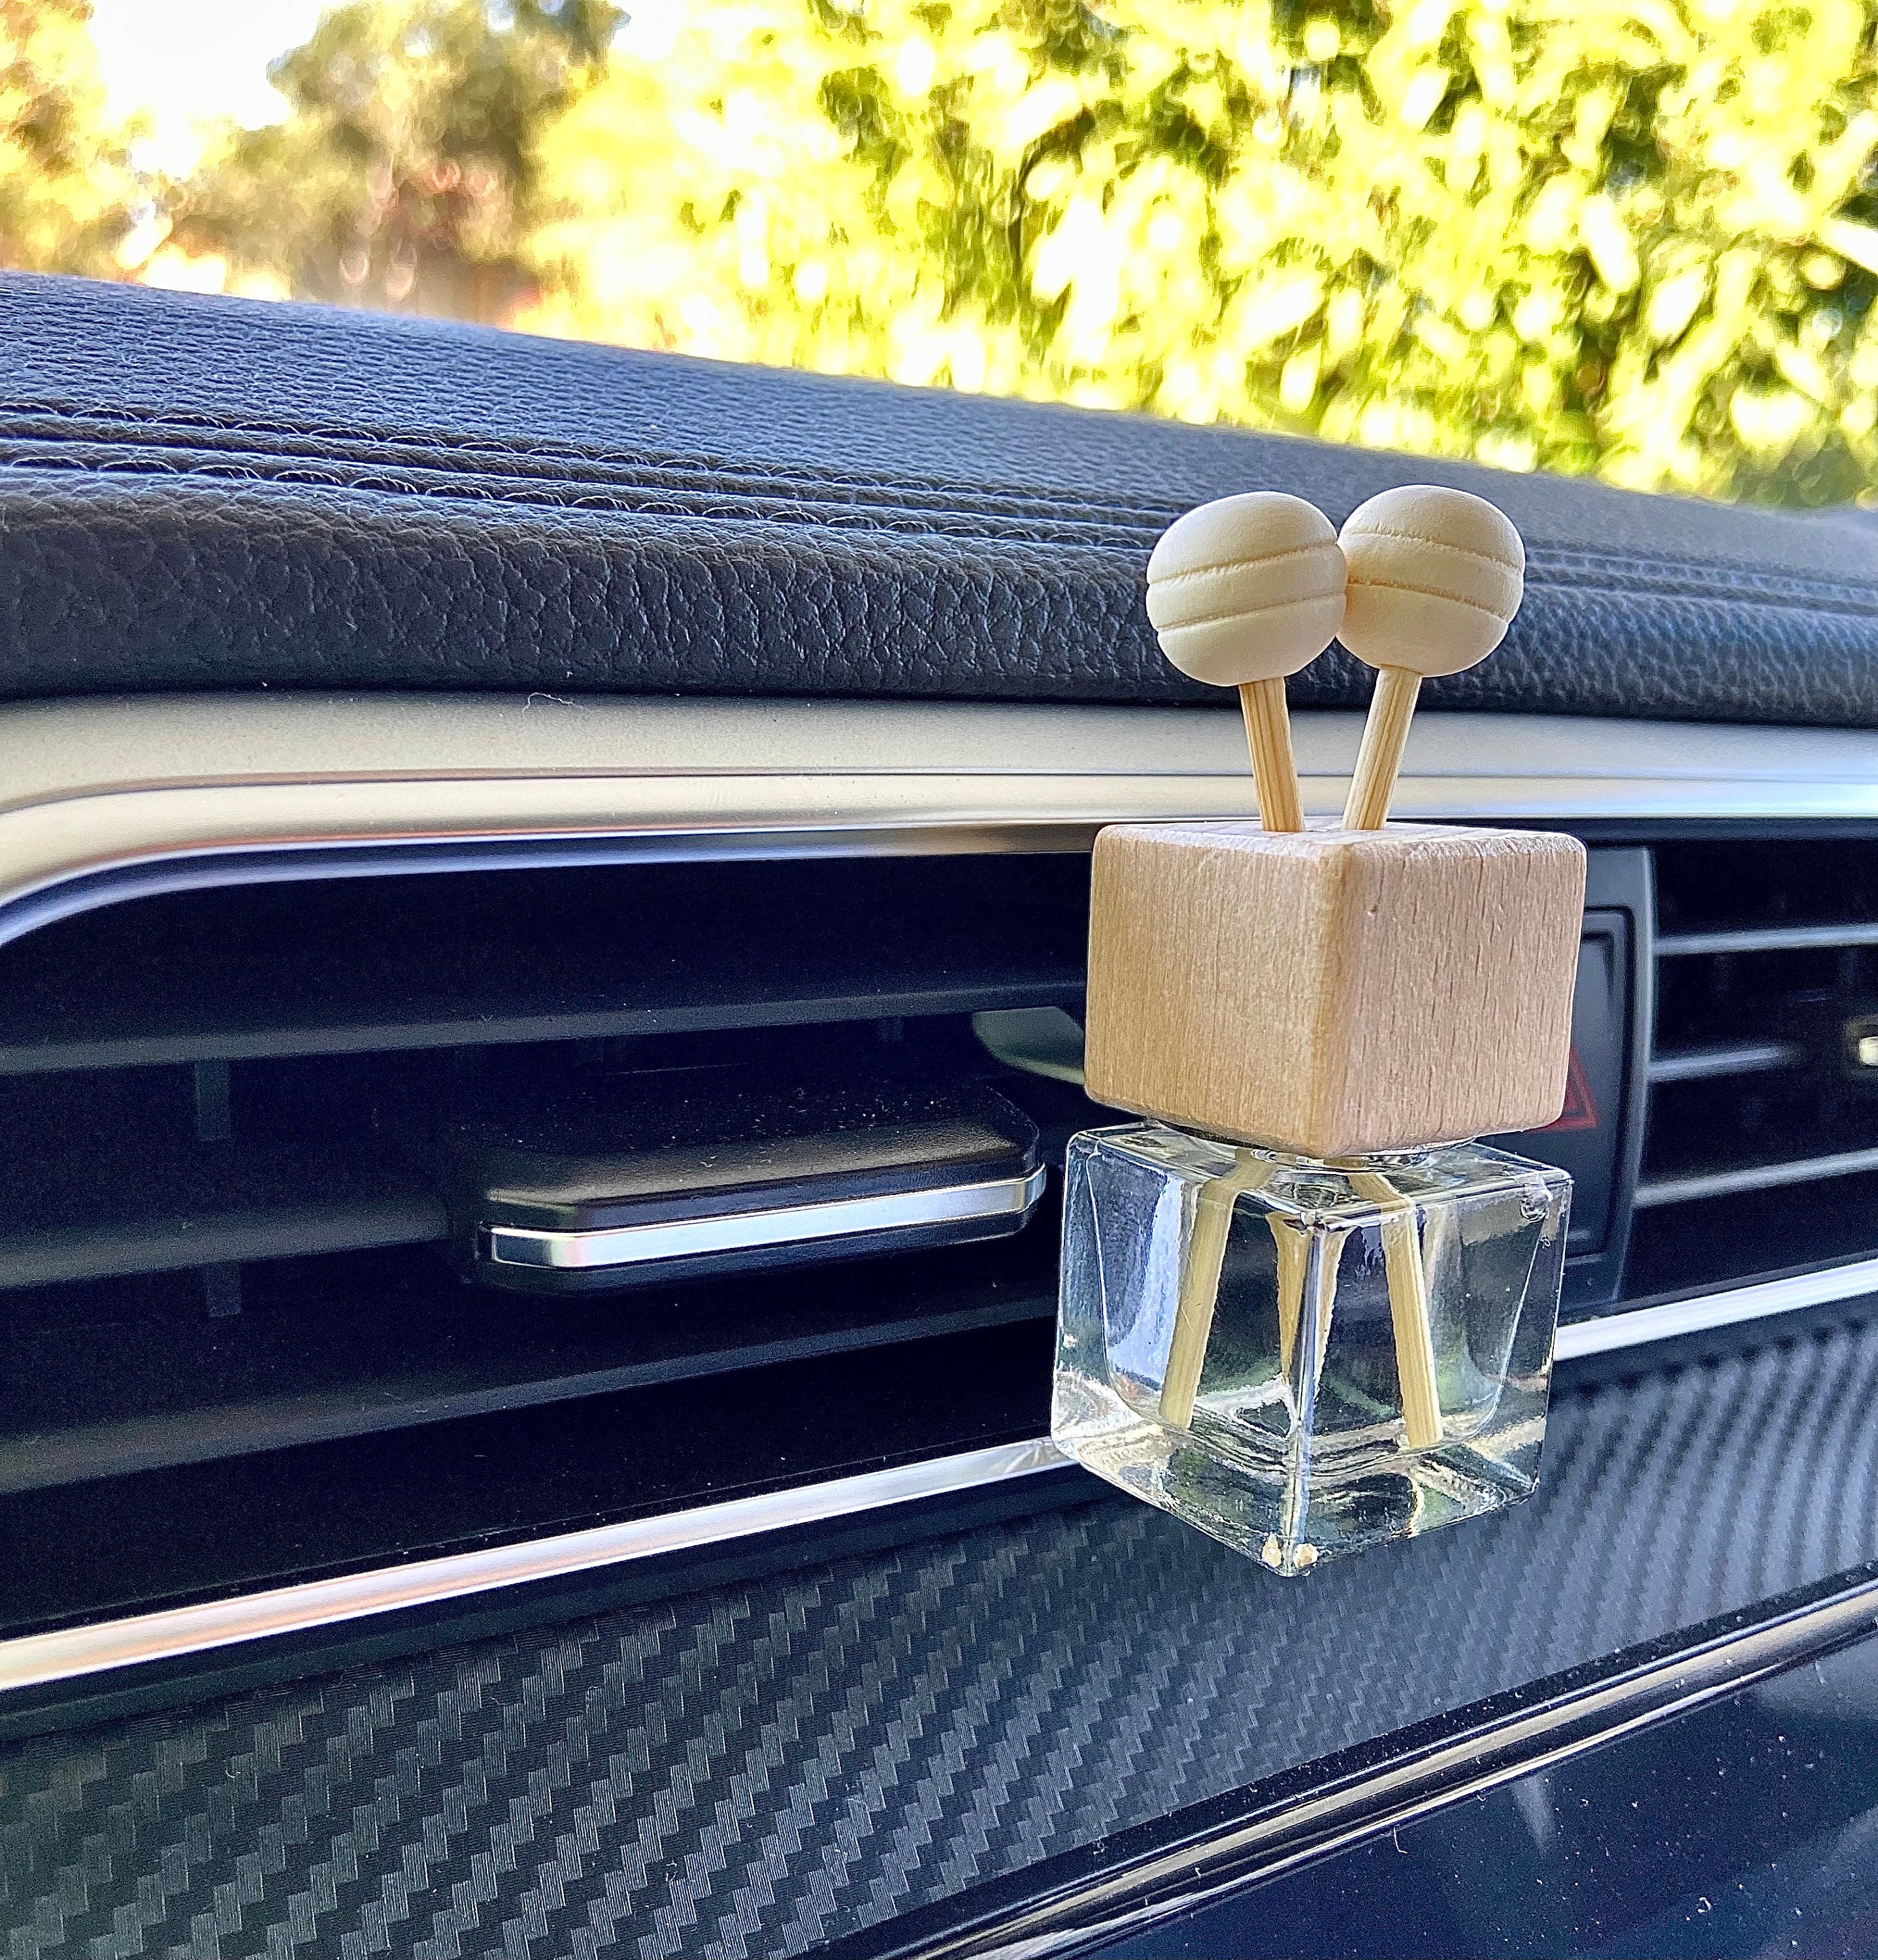 Scented Car Diffuser - Clip On Vent - Essential Oil Reed Diffuser